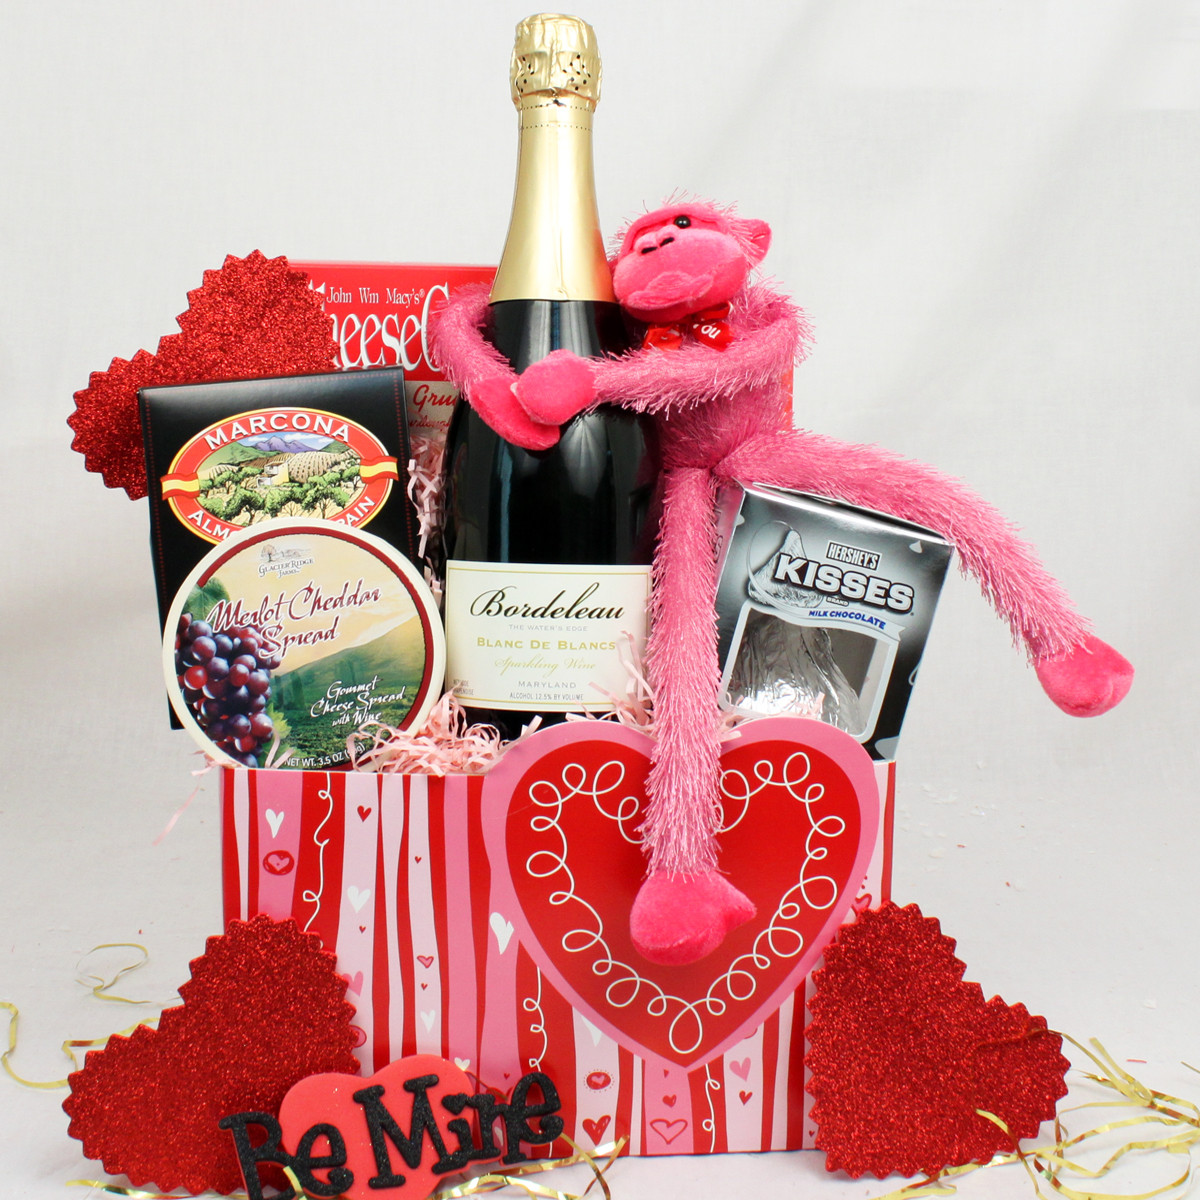 New Relationship Valentines Gift Ideas
 Creative and Thoughtful Valentine’s Day Gifts for Her